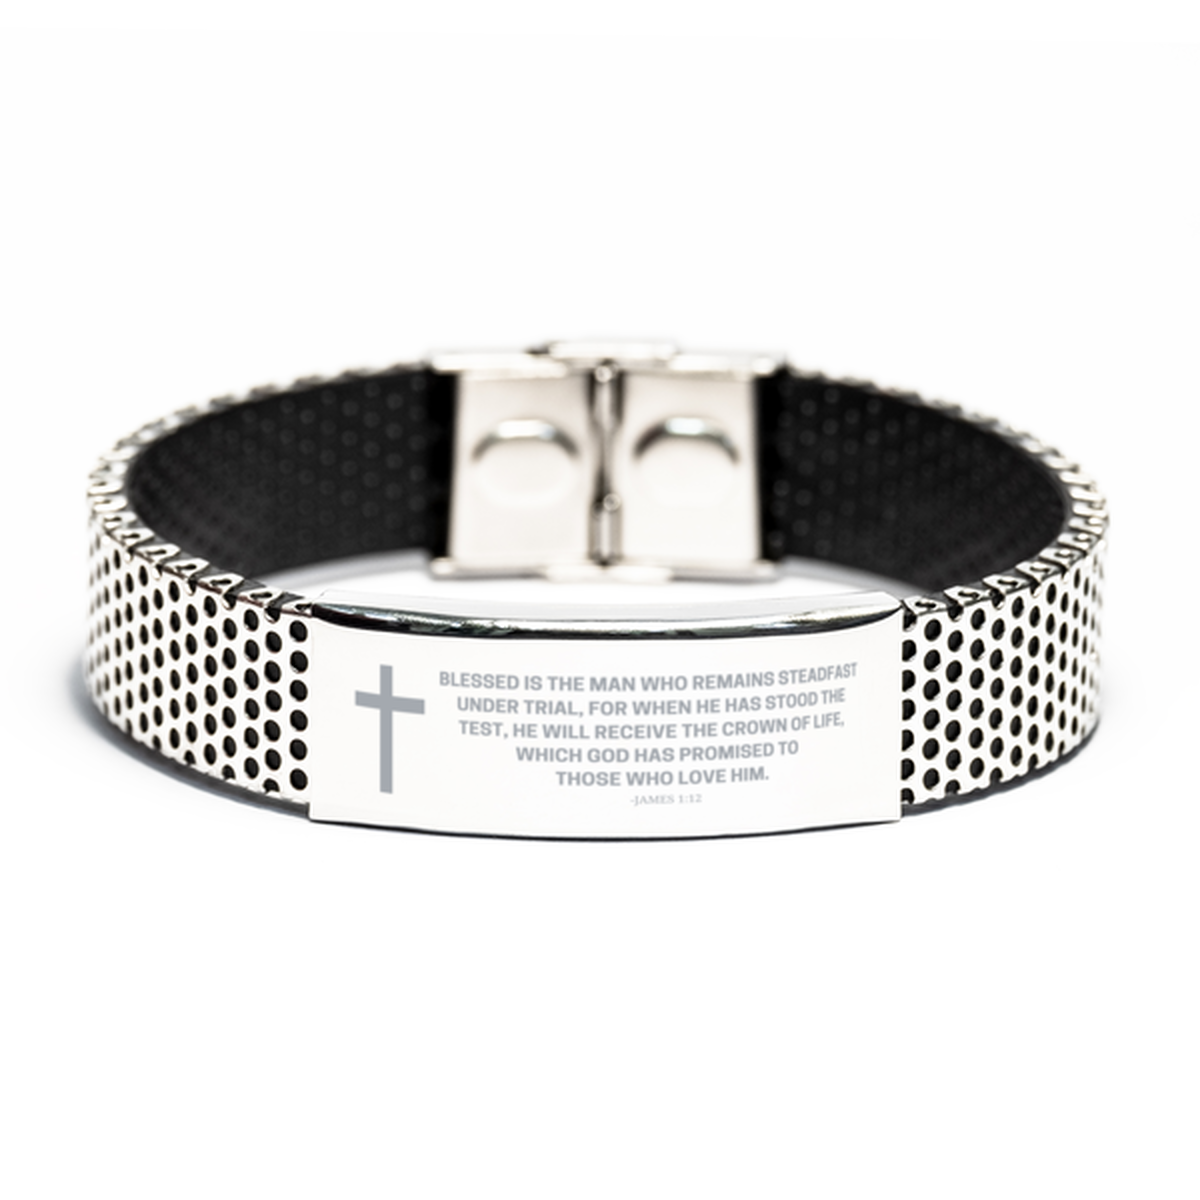 Baptism Gifts For Teenage Boys Girls, Christian Bible Verse Stainless Steel Bracelet, Blessed is the man who remains, Catholic Confirmation Gifts for Son, Godson, Grandson, Nephew